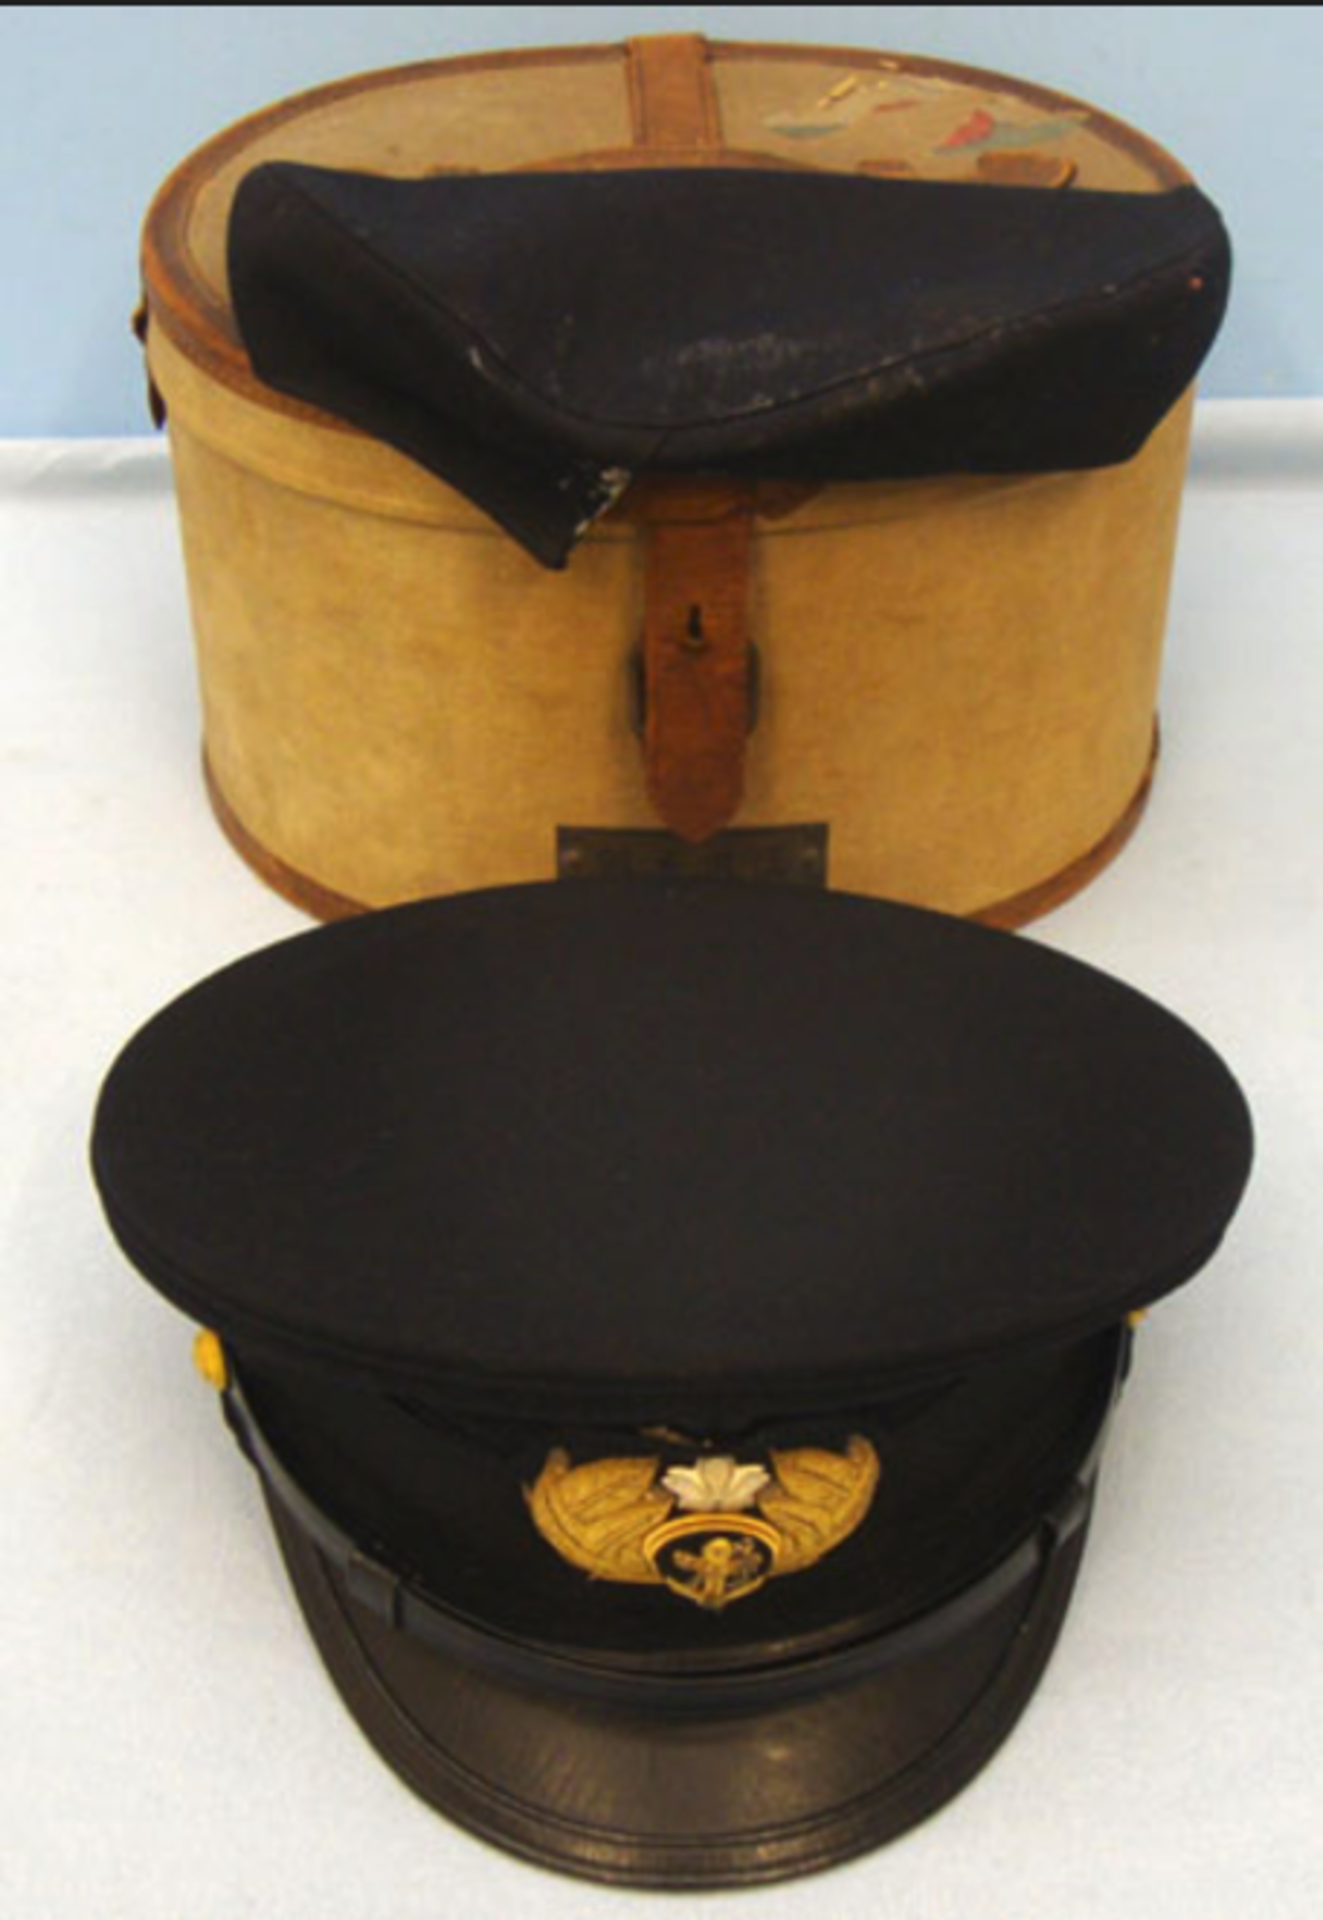 WW2 Japanese Naval Officer's Visor Cap with Bullion Badge in Original Lined Carry Box